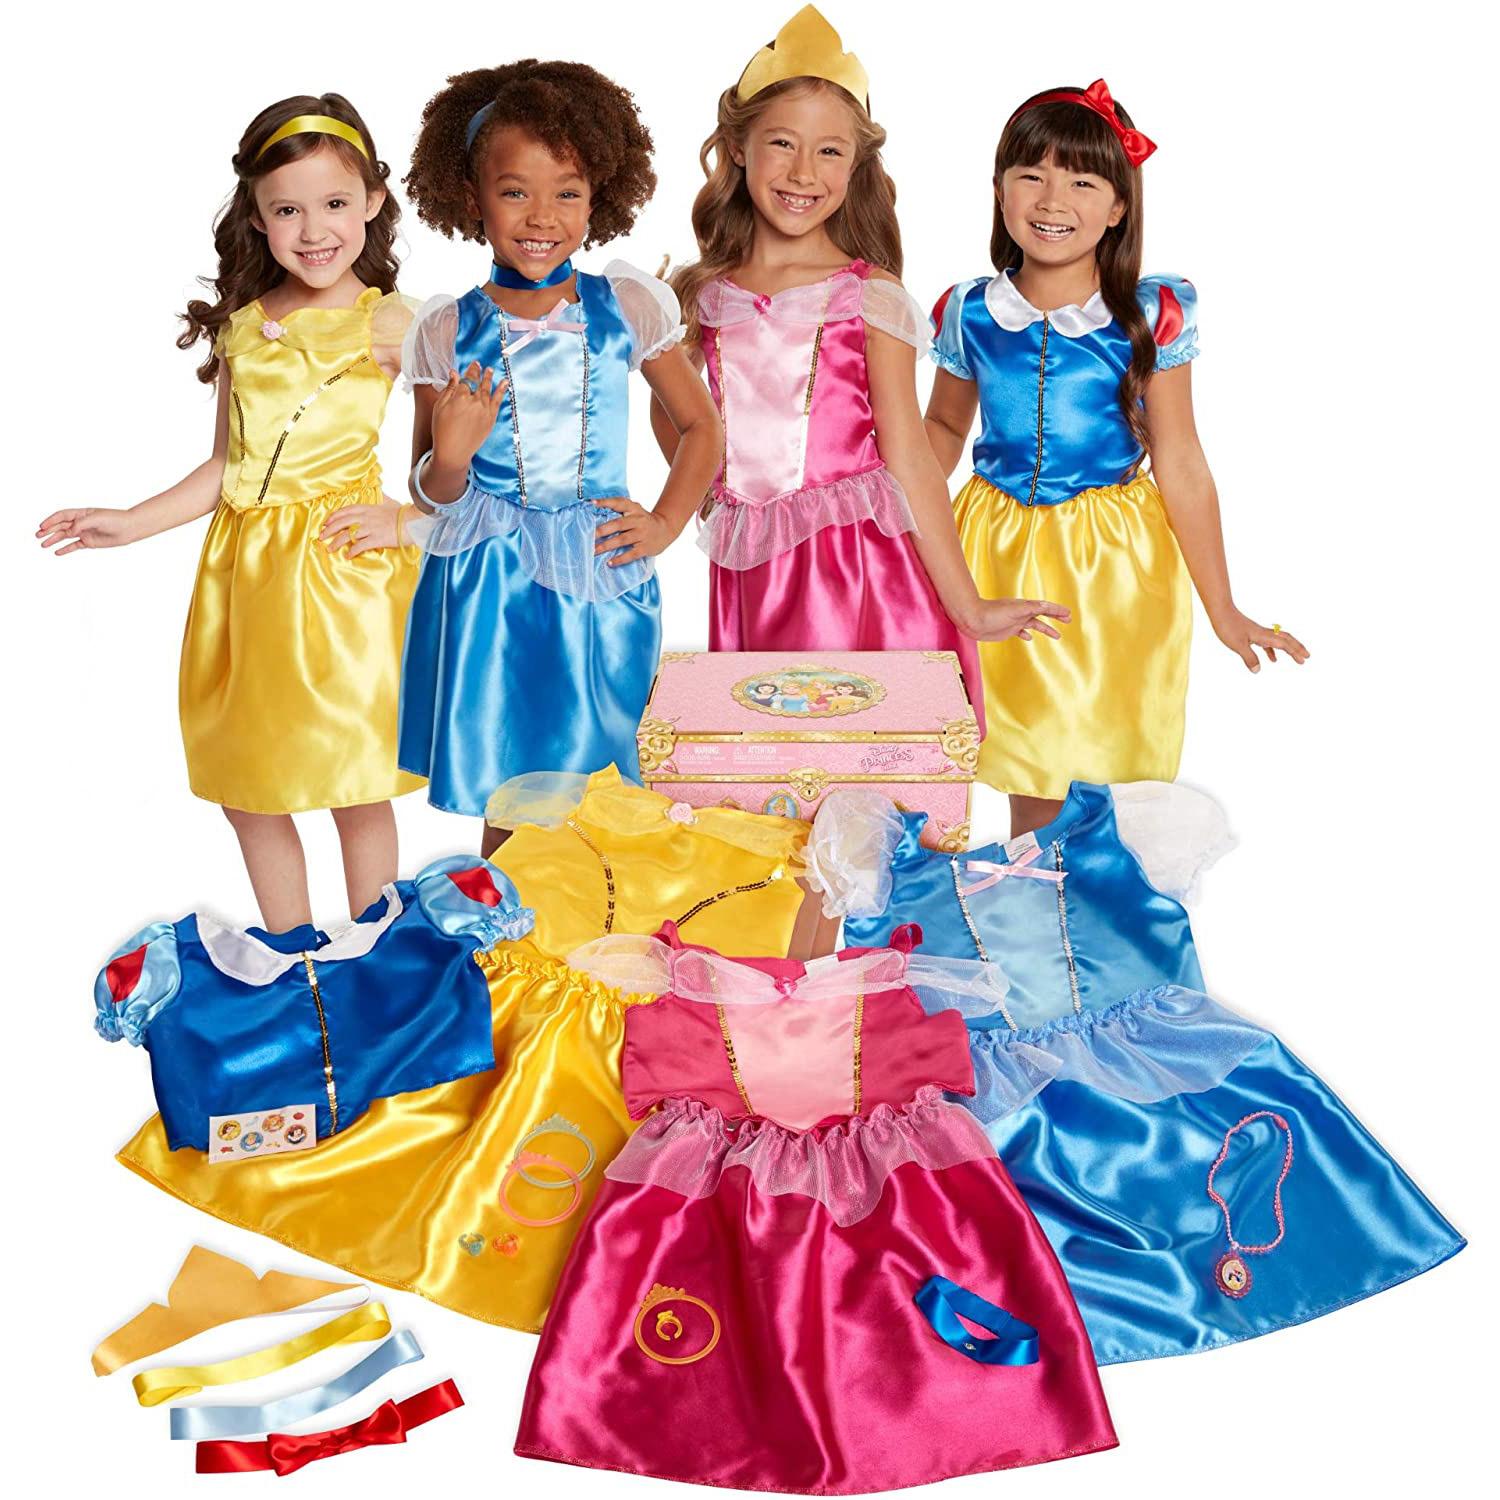 Disney Princess Dress Up Trunk Deluxe 21 Piece for $24.49